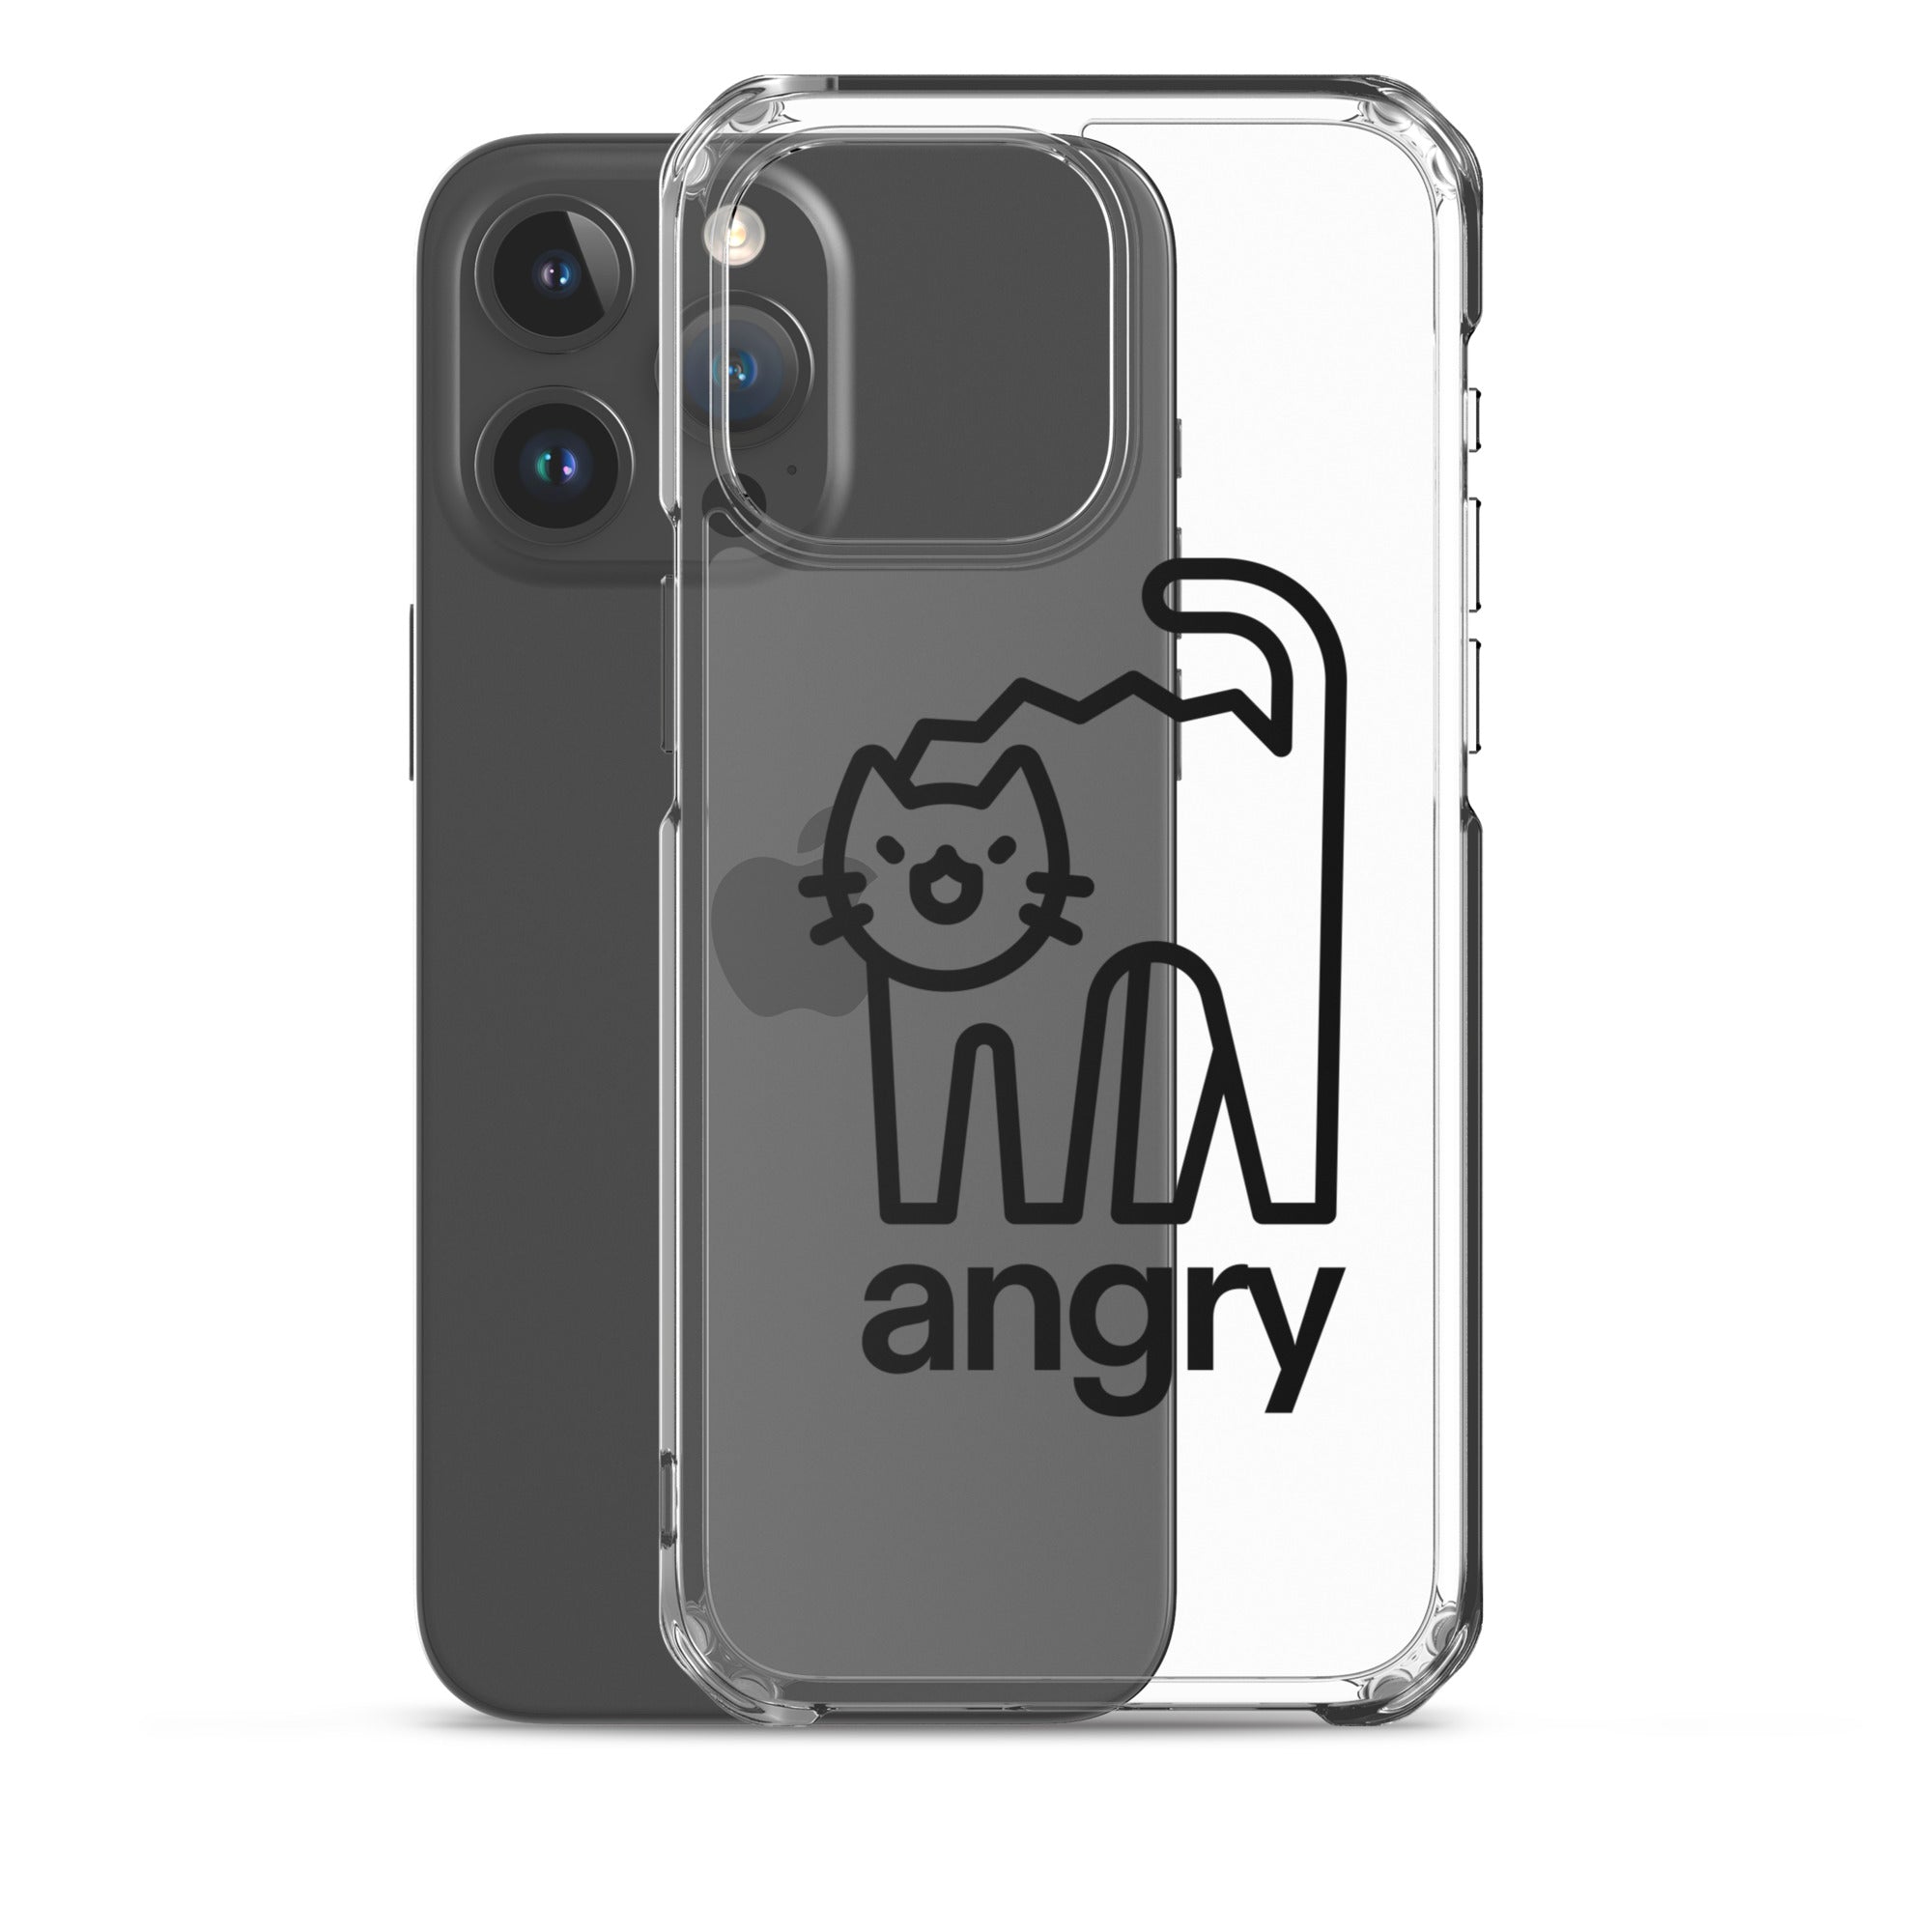 ANGRY® iPhone case